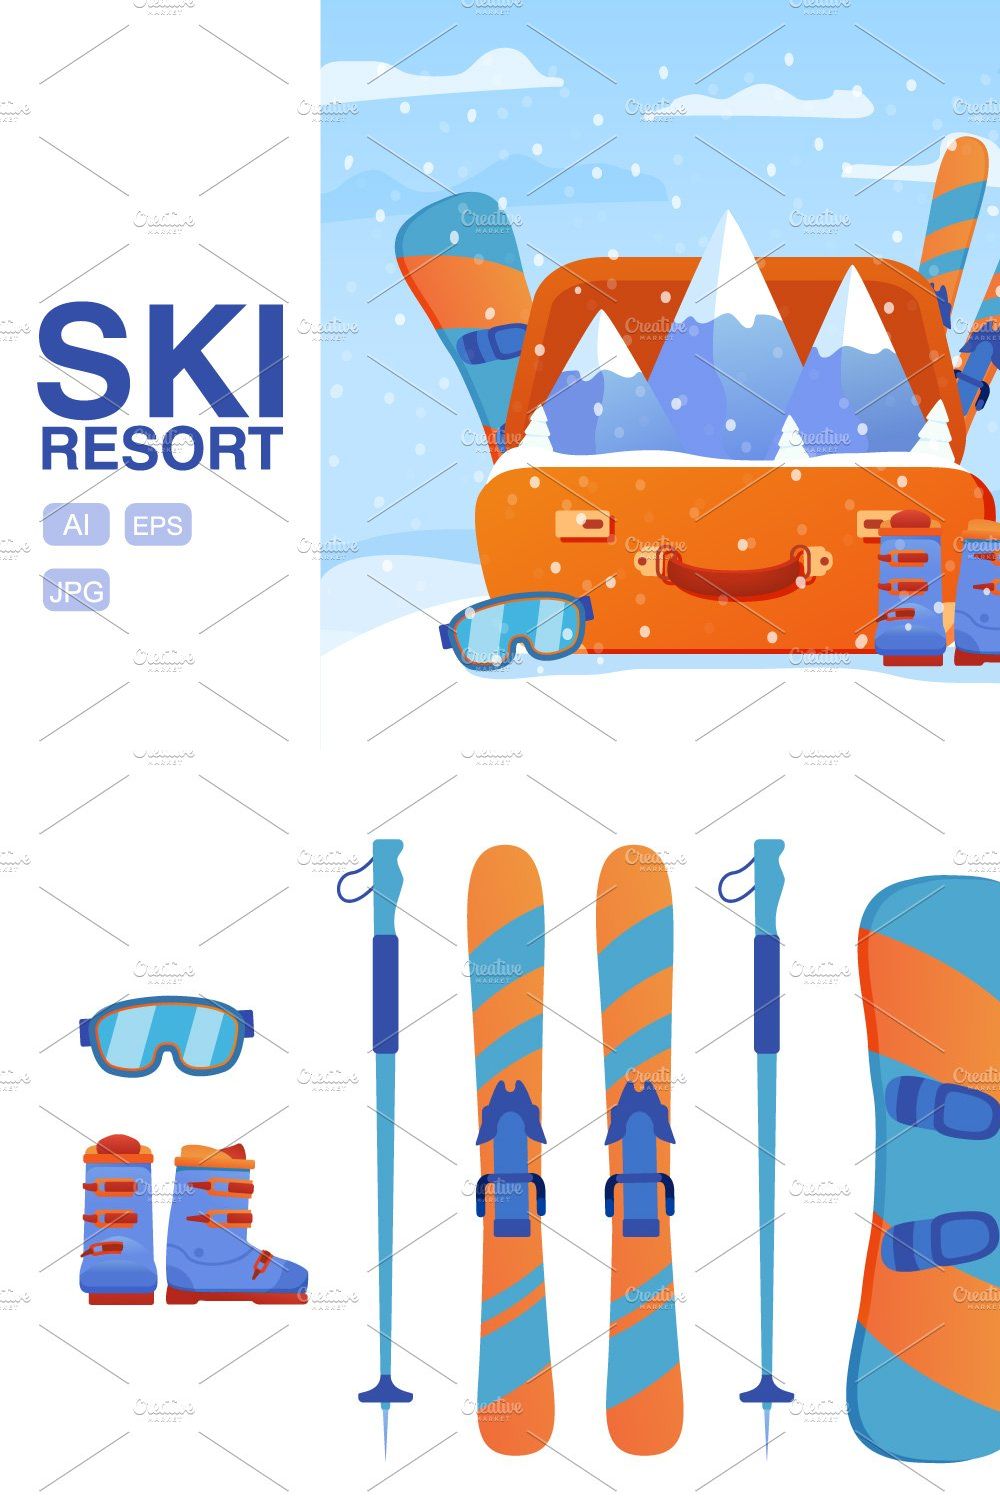 Suitcase vacation at a ski resort. pinterest preview image.